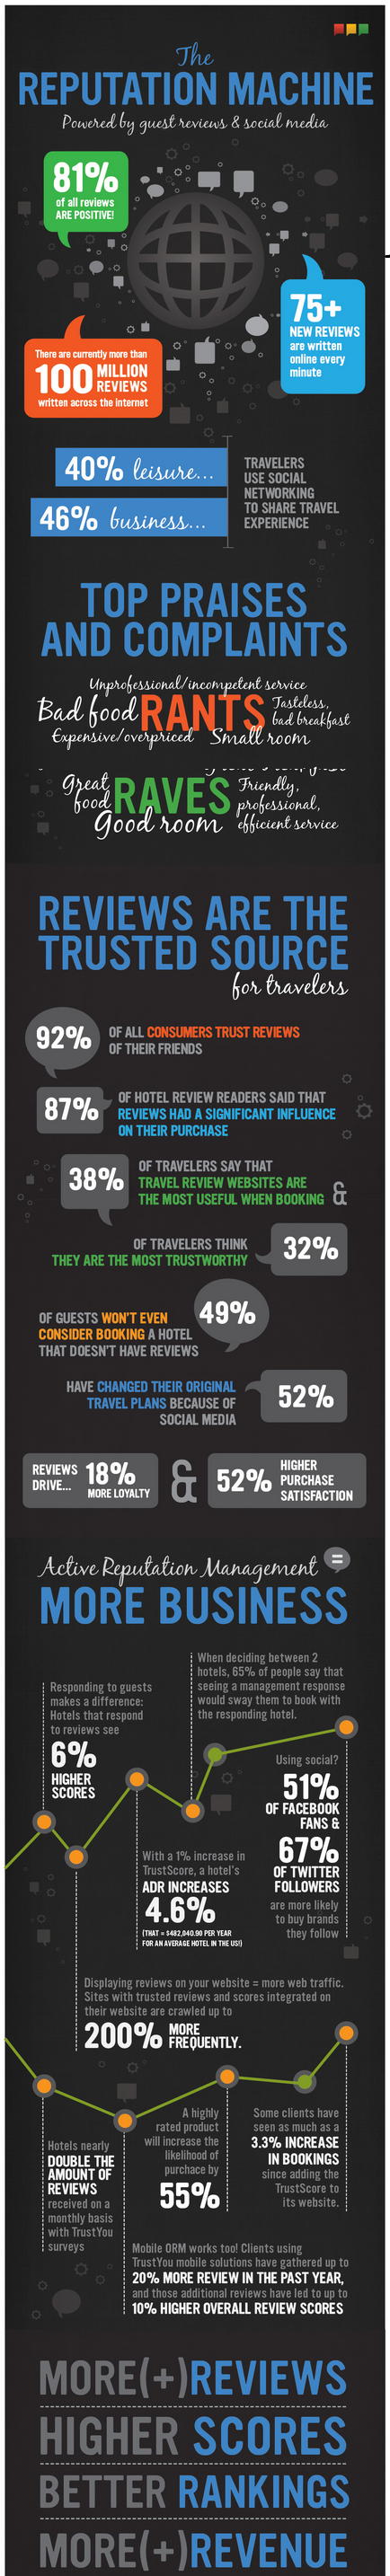 Reviews  Revenue and the Reputation Machine  infographic